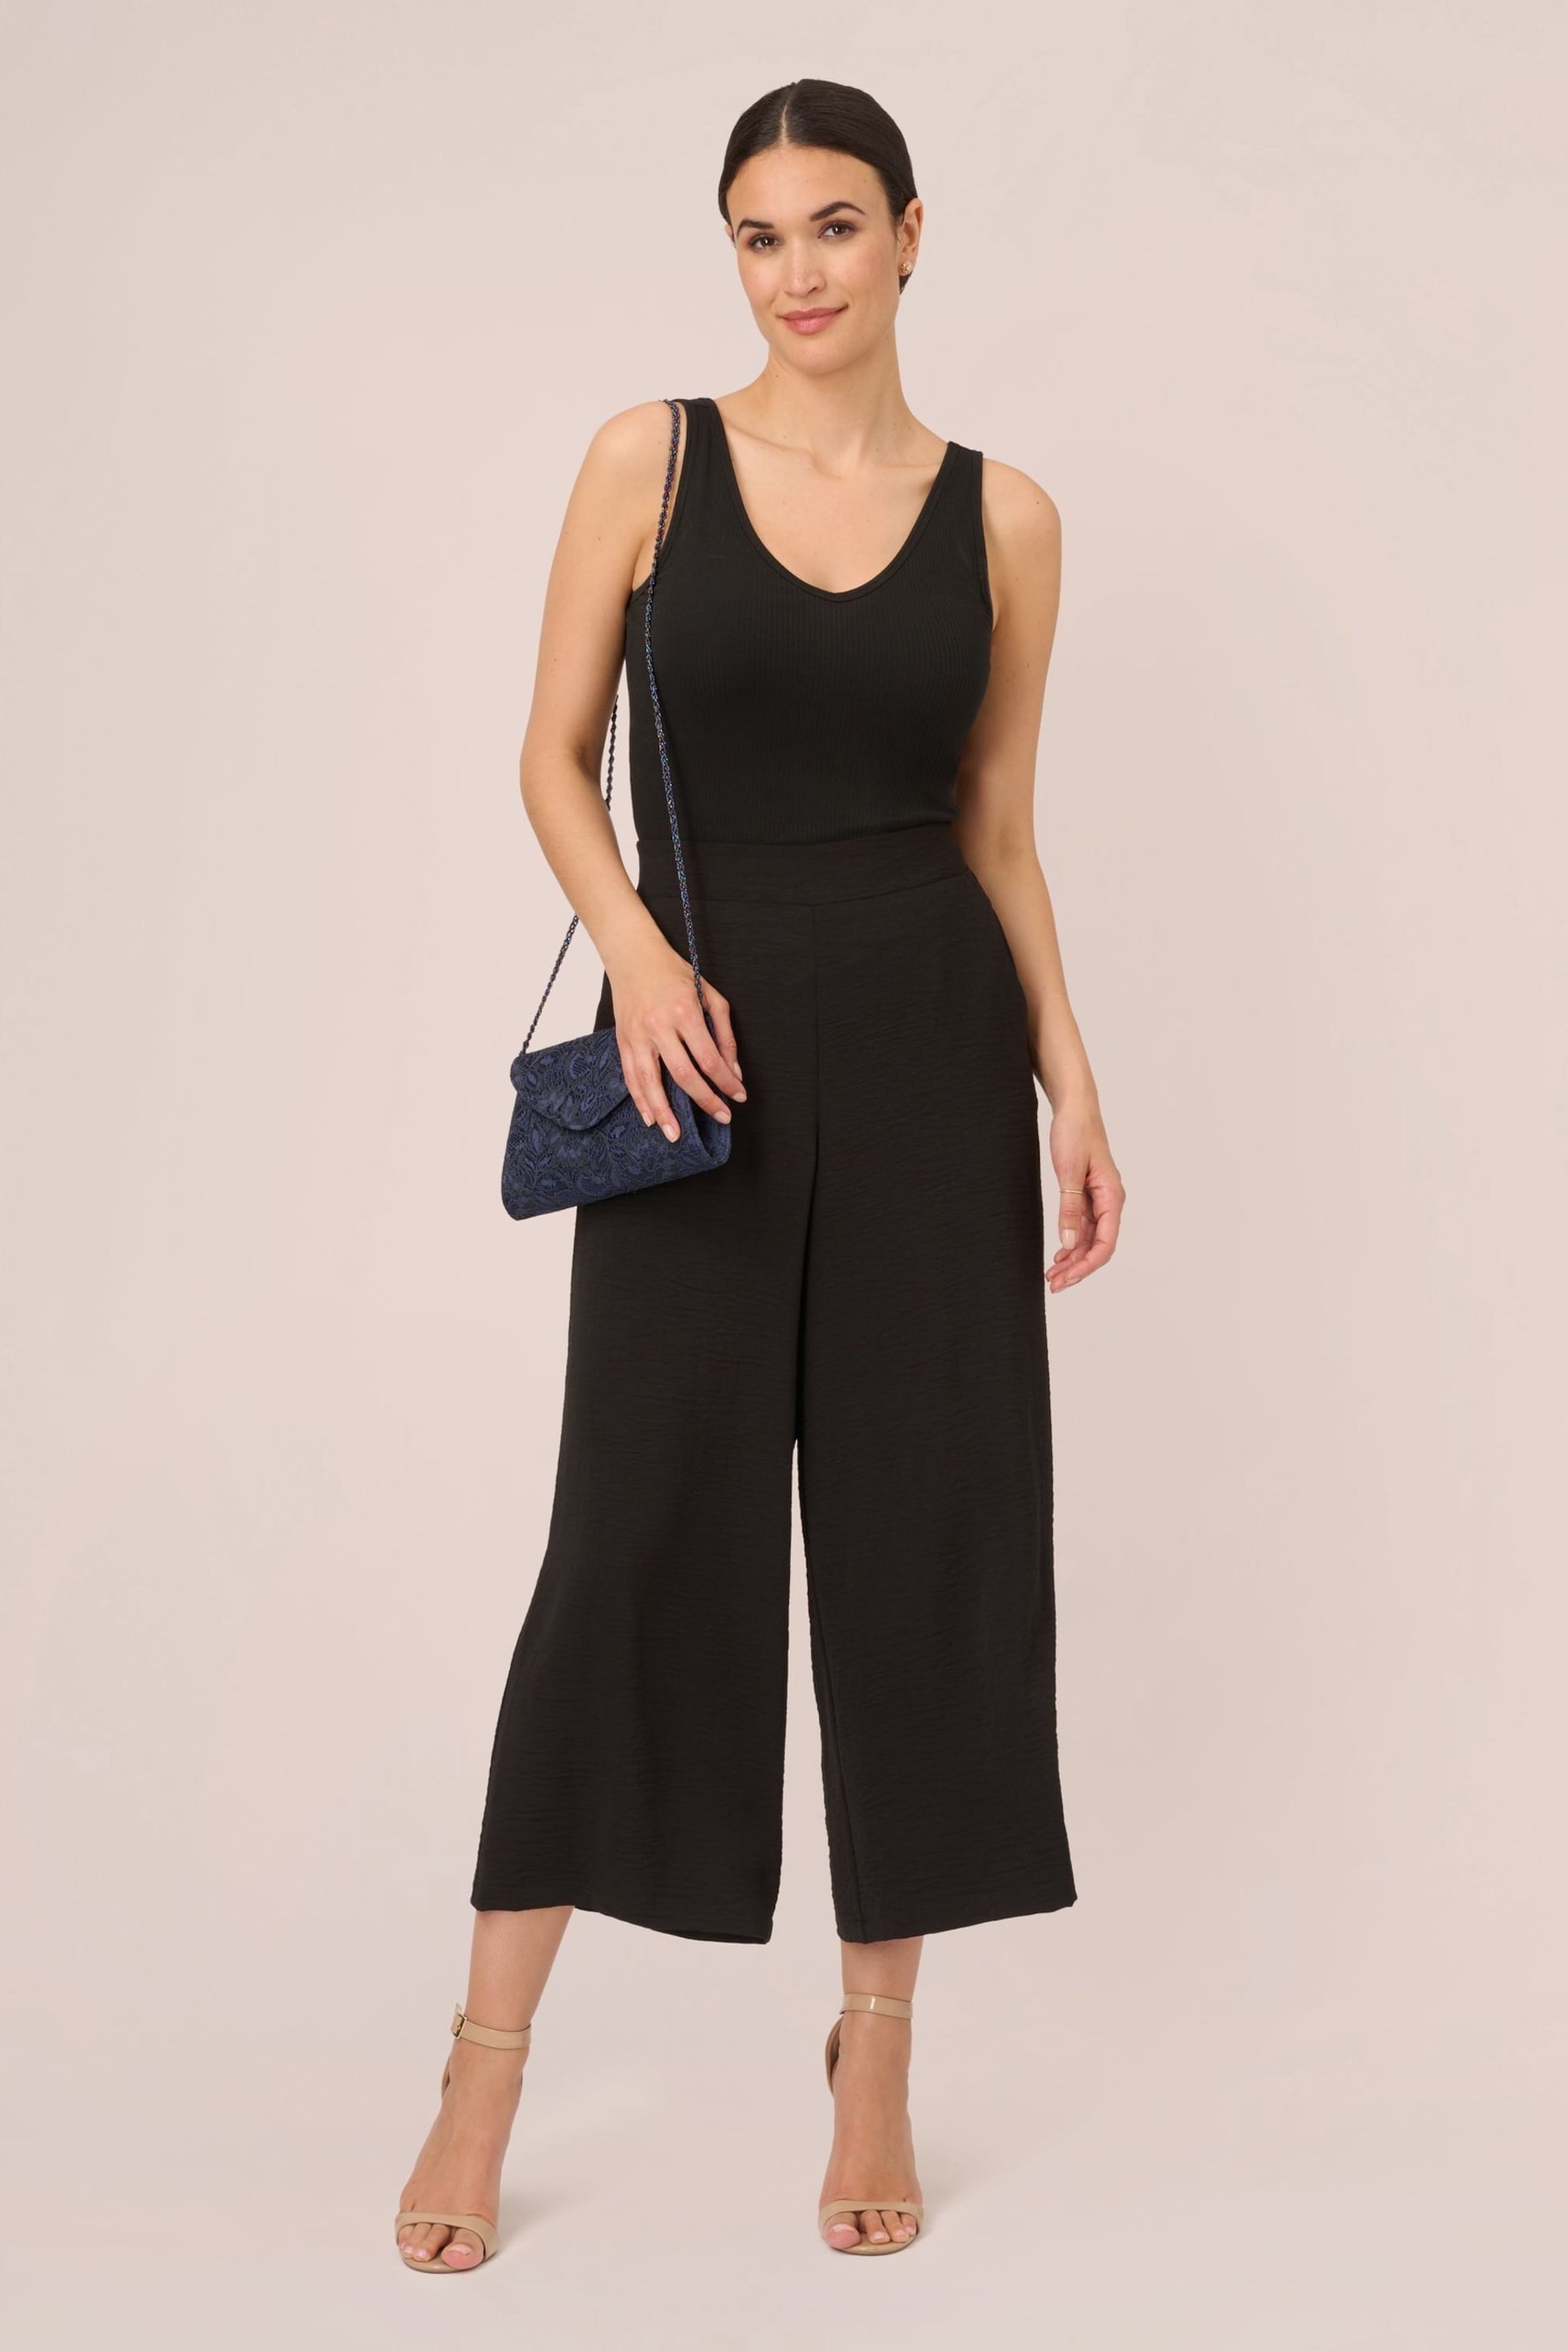 Adrianna Papell Textured Wide Leg Pull On Black Trousers Slit Pockets - Image 3 of 6